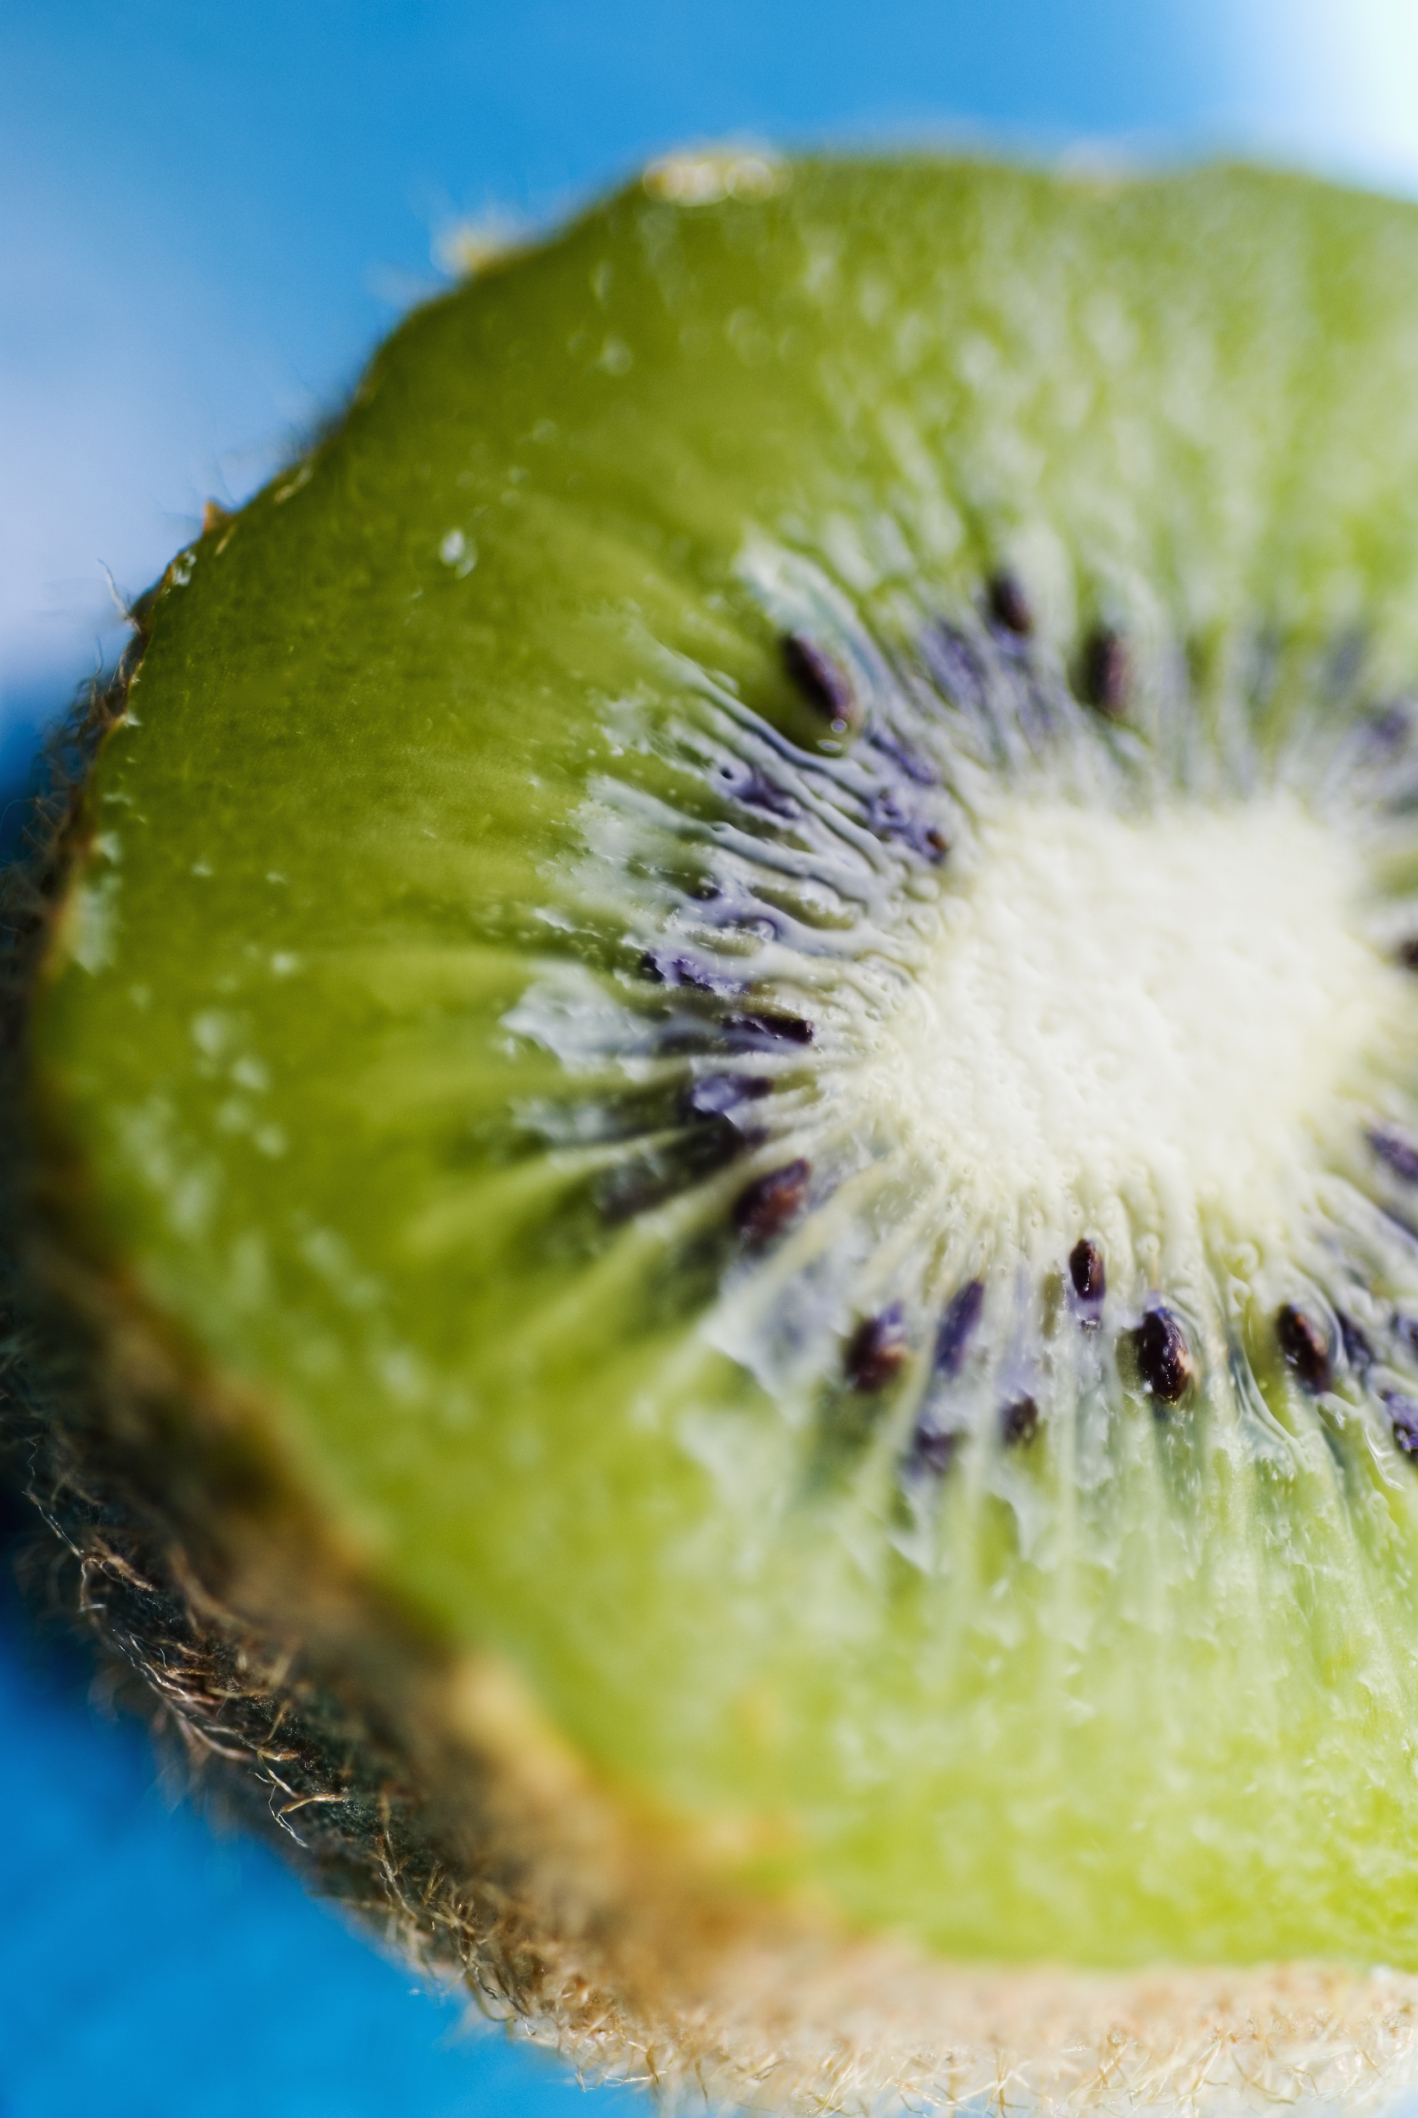 Kiwi Information and Facts